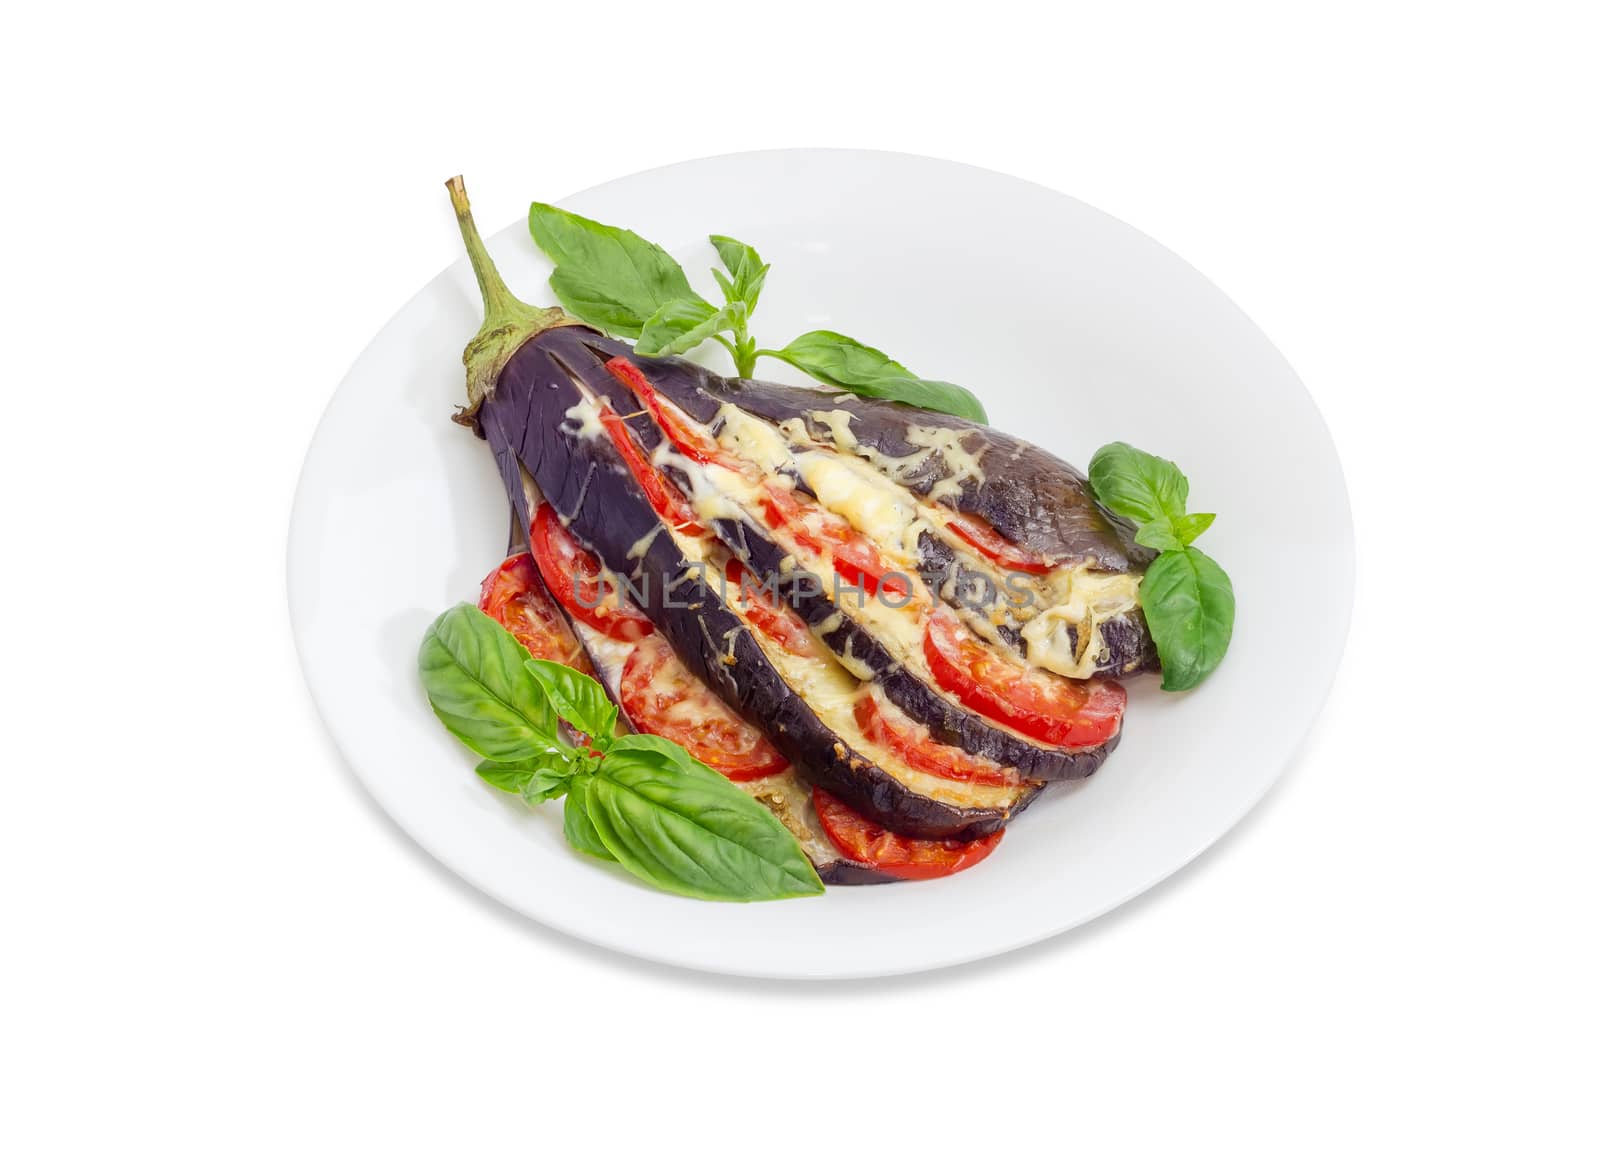 Eggplant stuffed with vegetables and cheese by anmbph